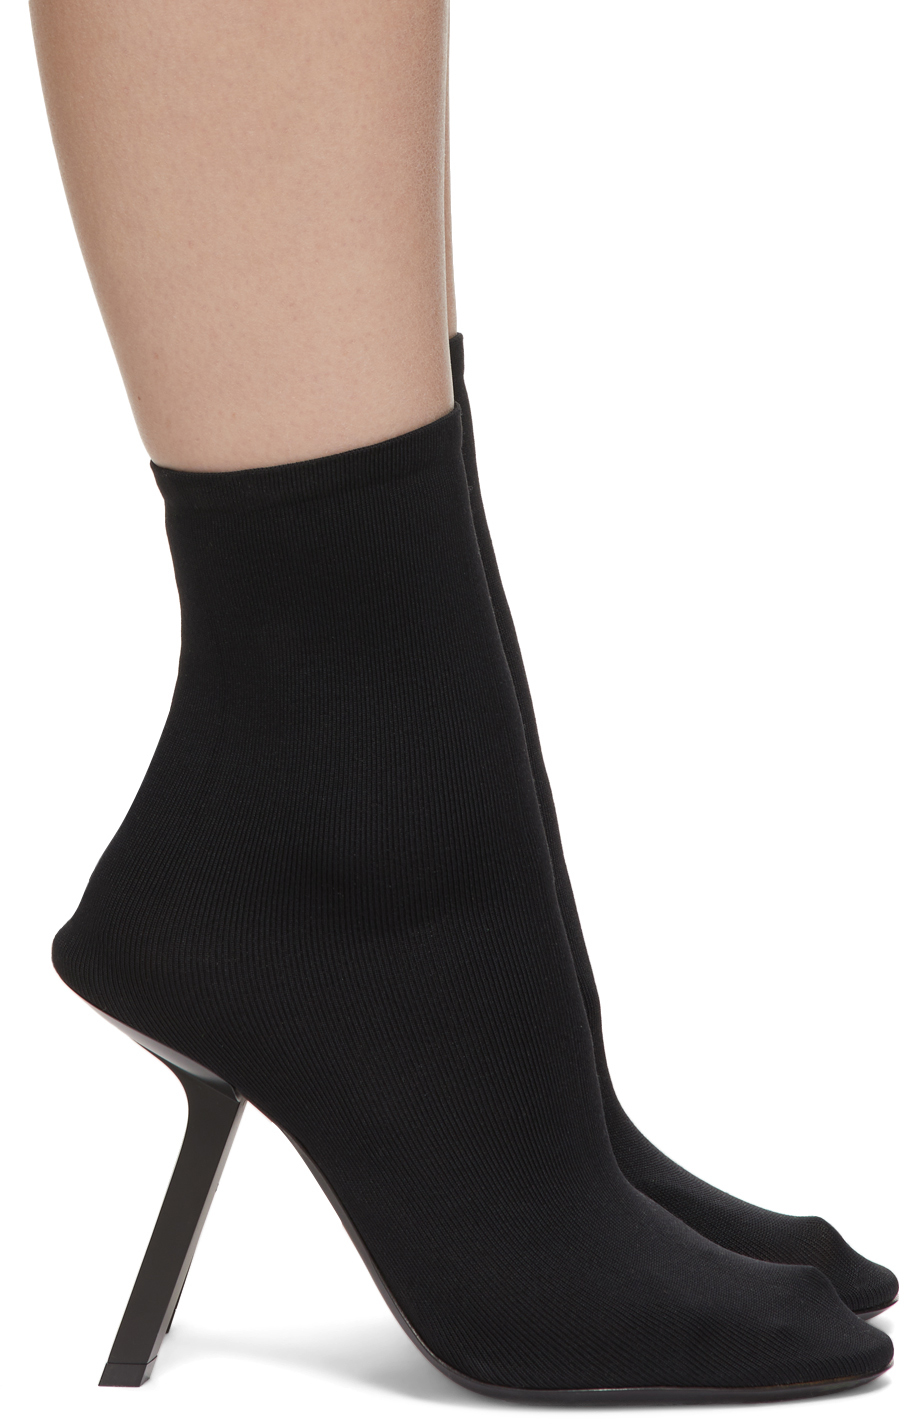 BALENCIAGA Knife metallic printed stretchknit sock boots  Sale up to 70  off  THE OUTNET